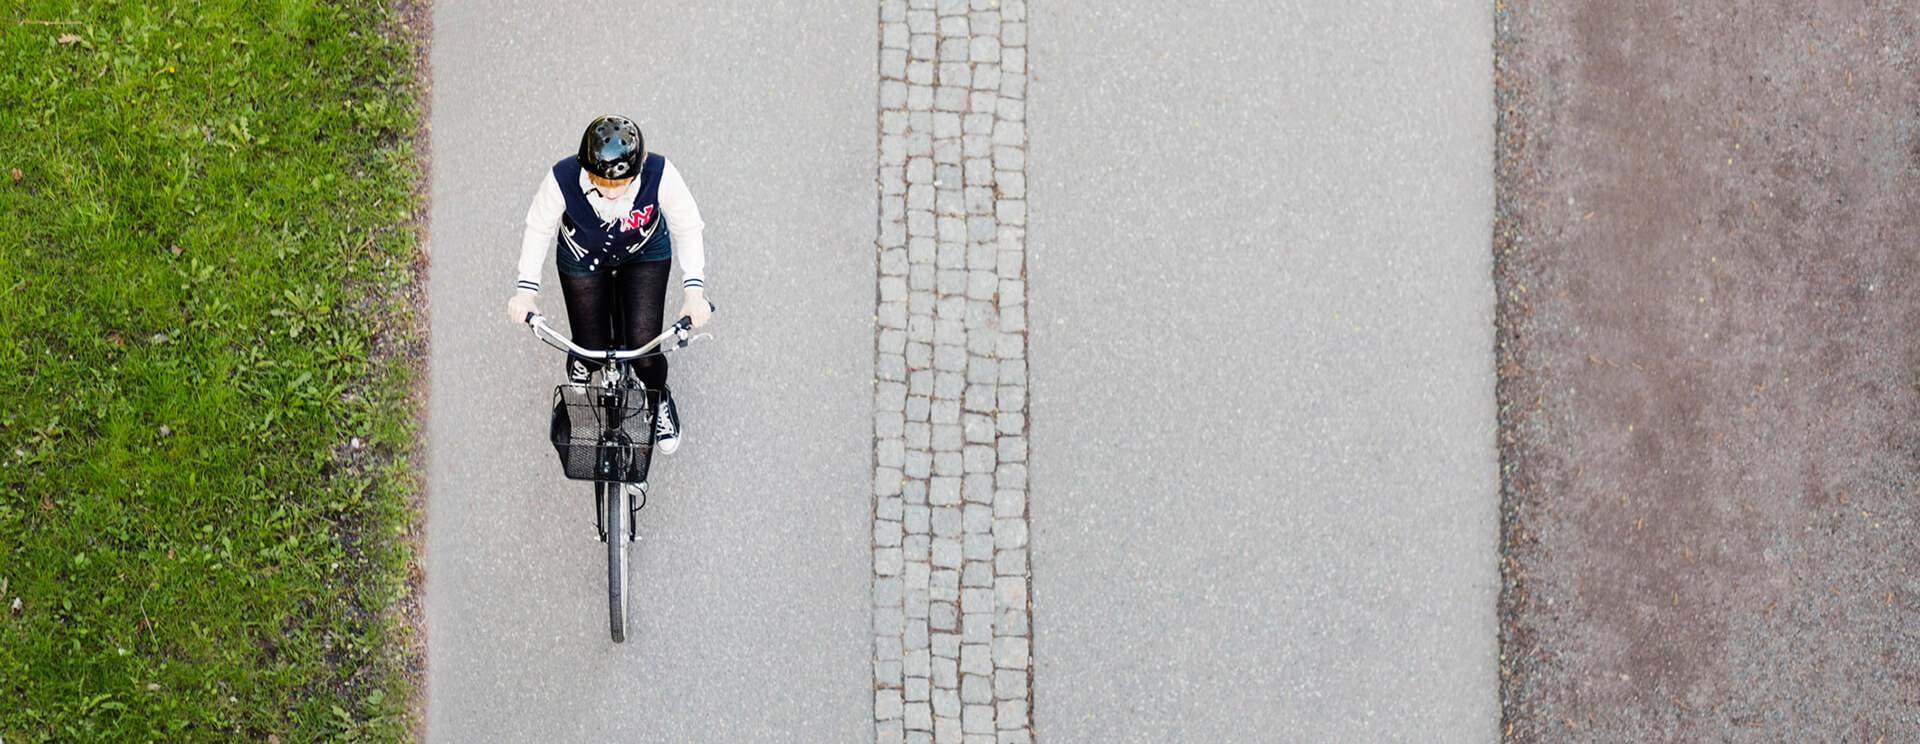 High angle view of businesswoman riding bicycle on road